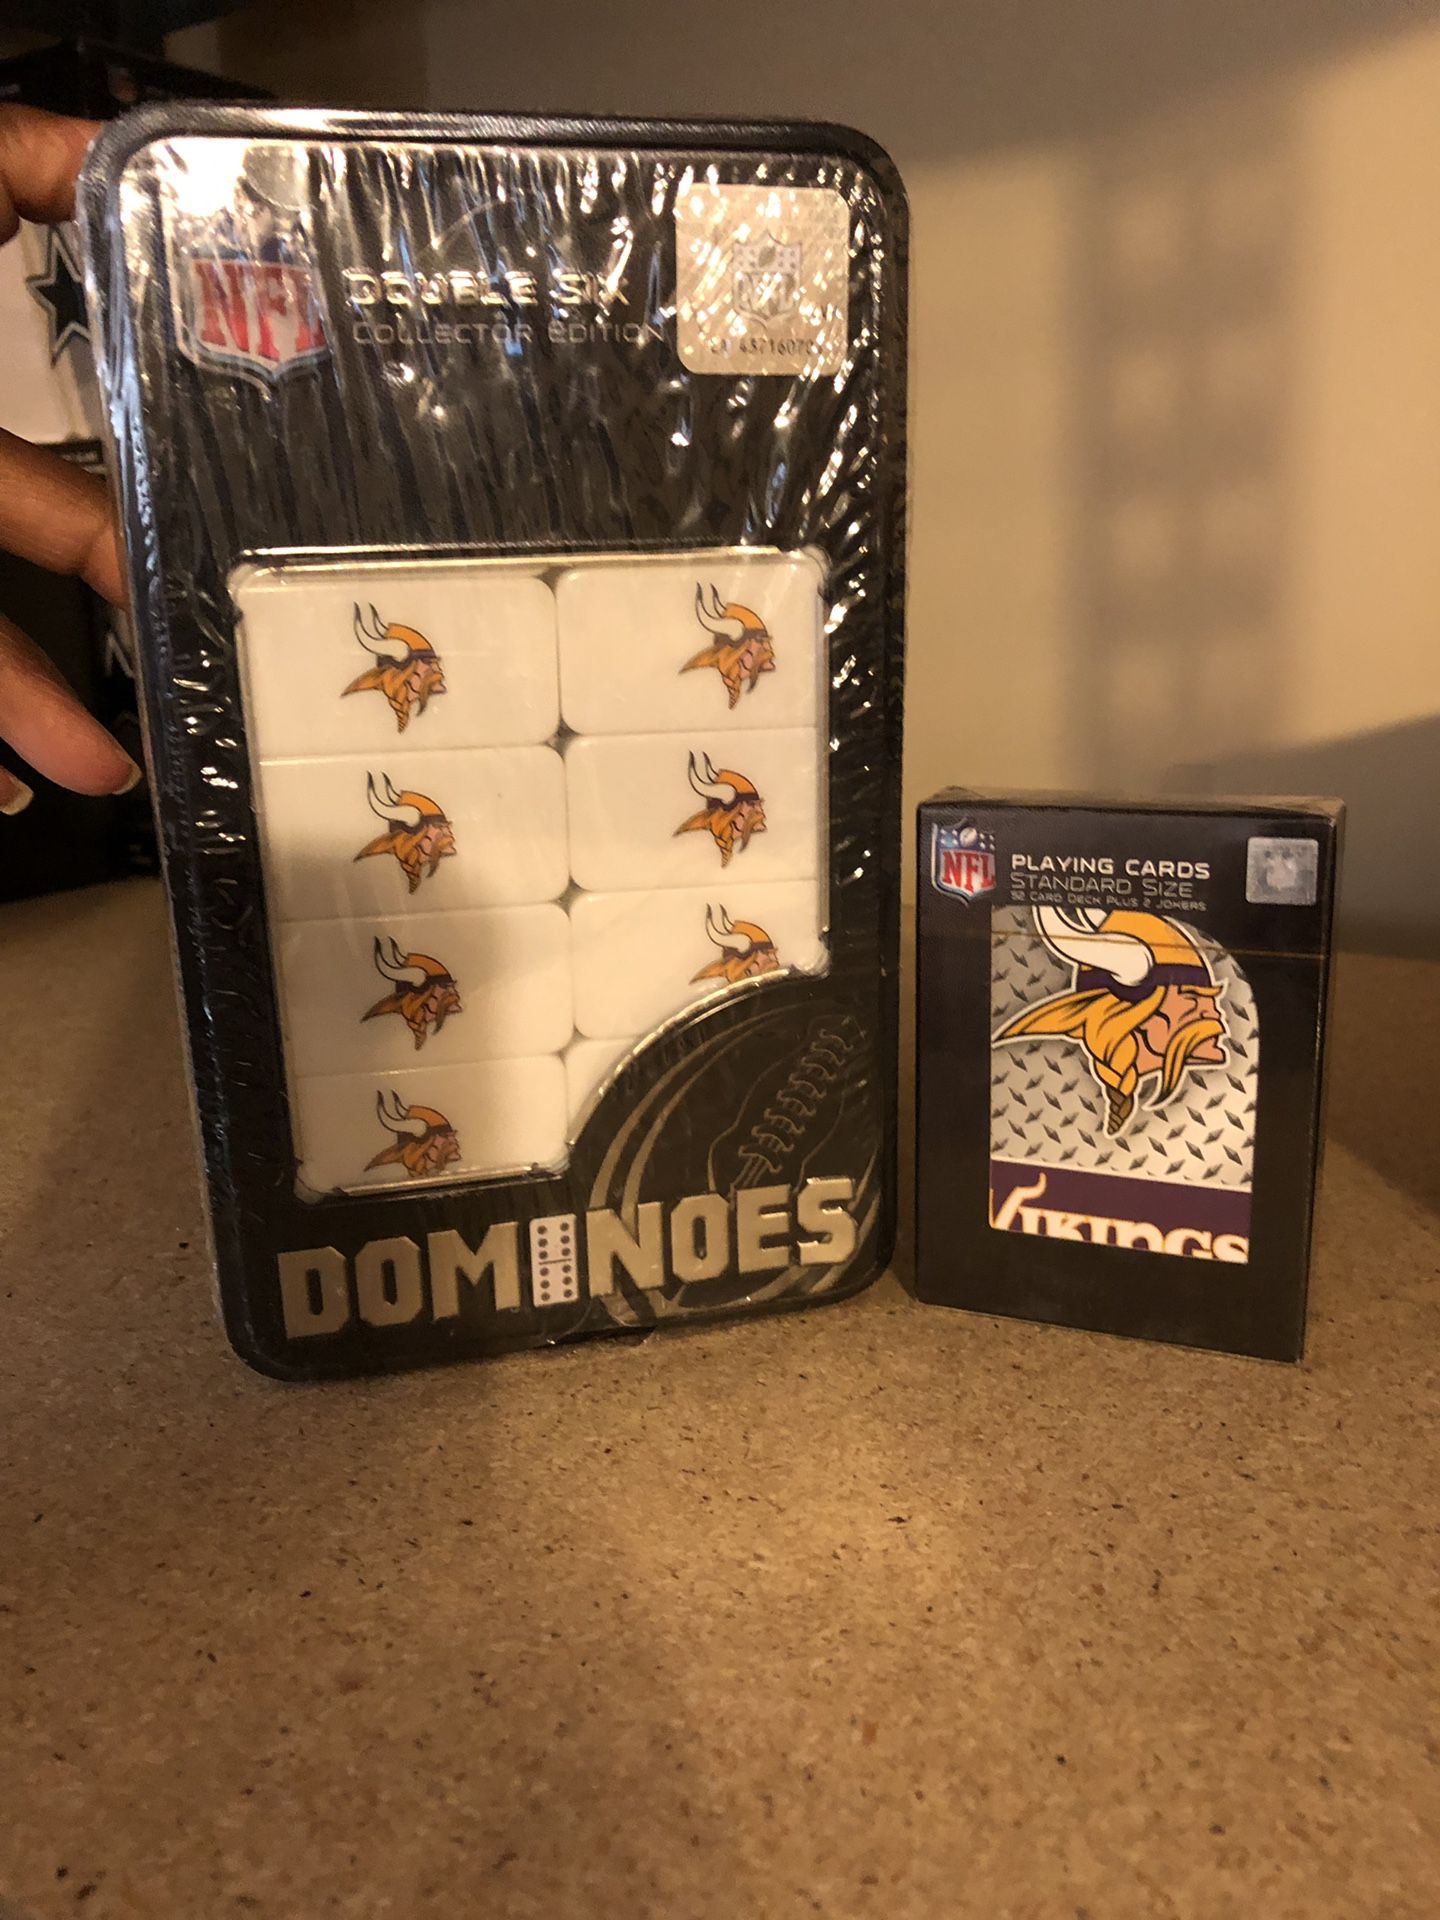 Minnesota Vikings double six dominoes and playing cards